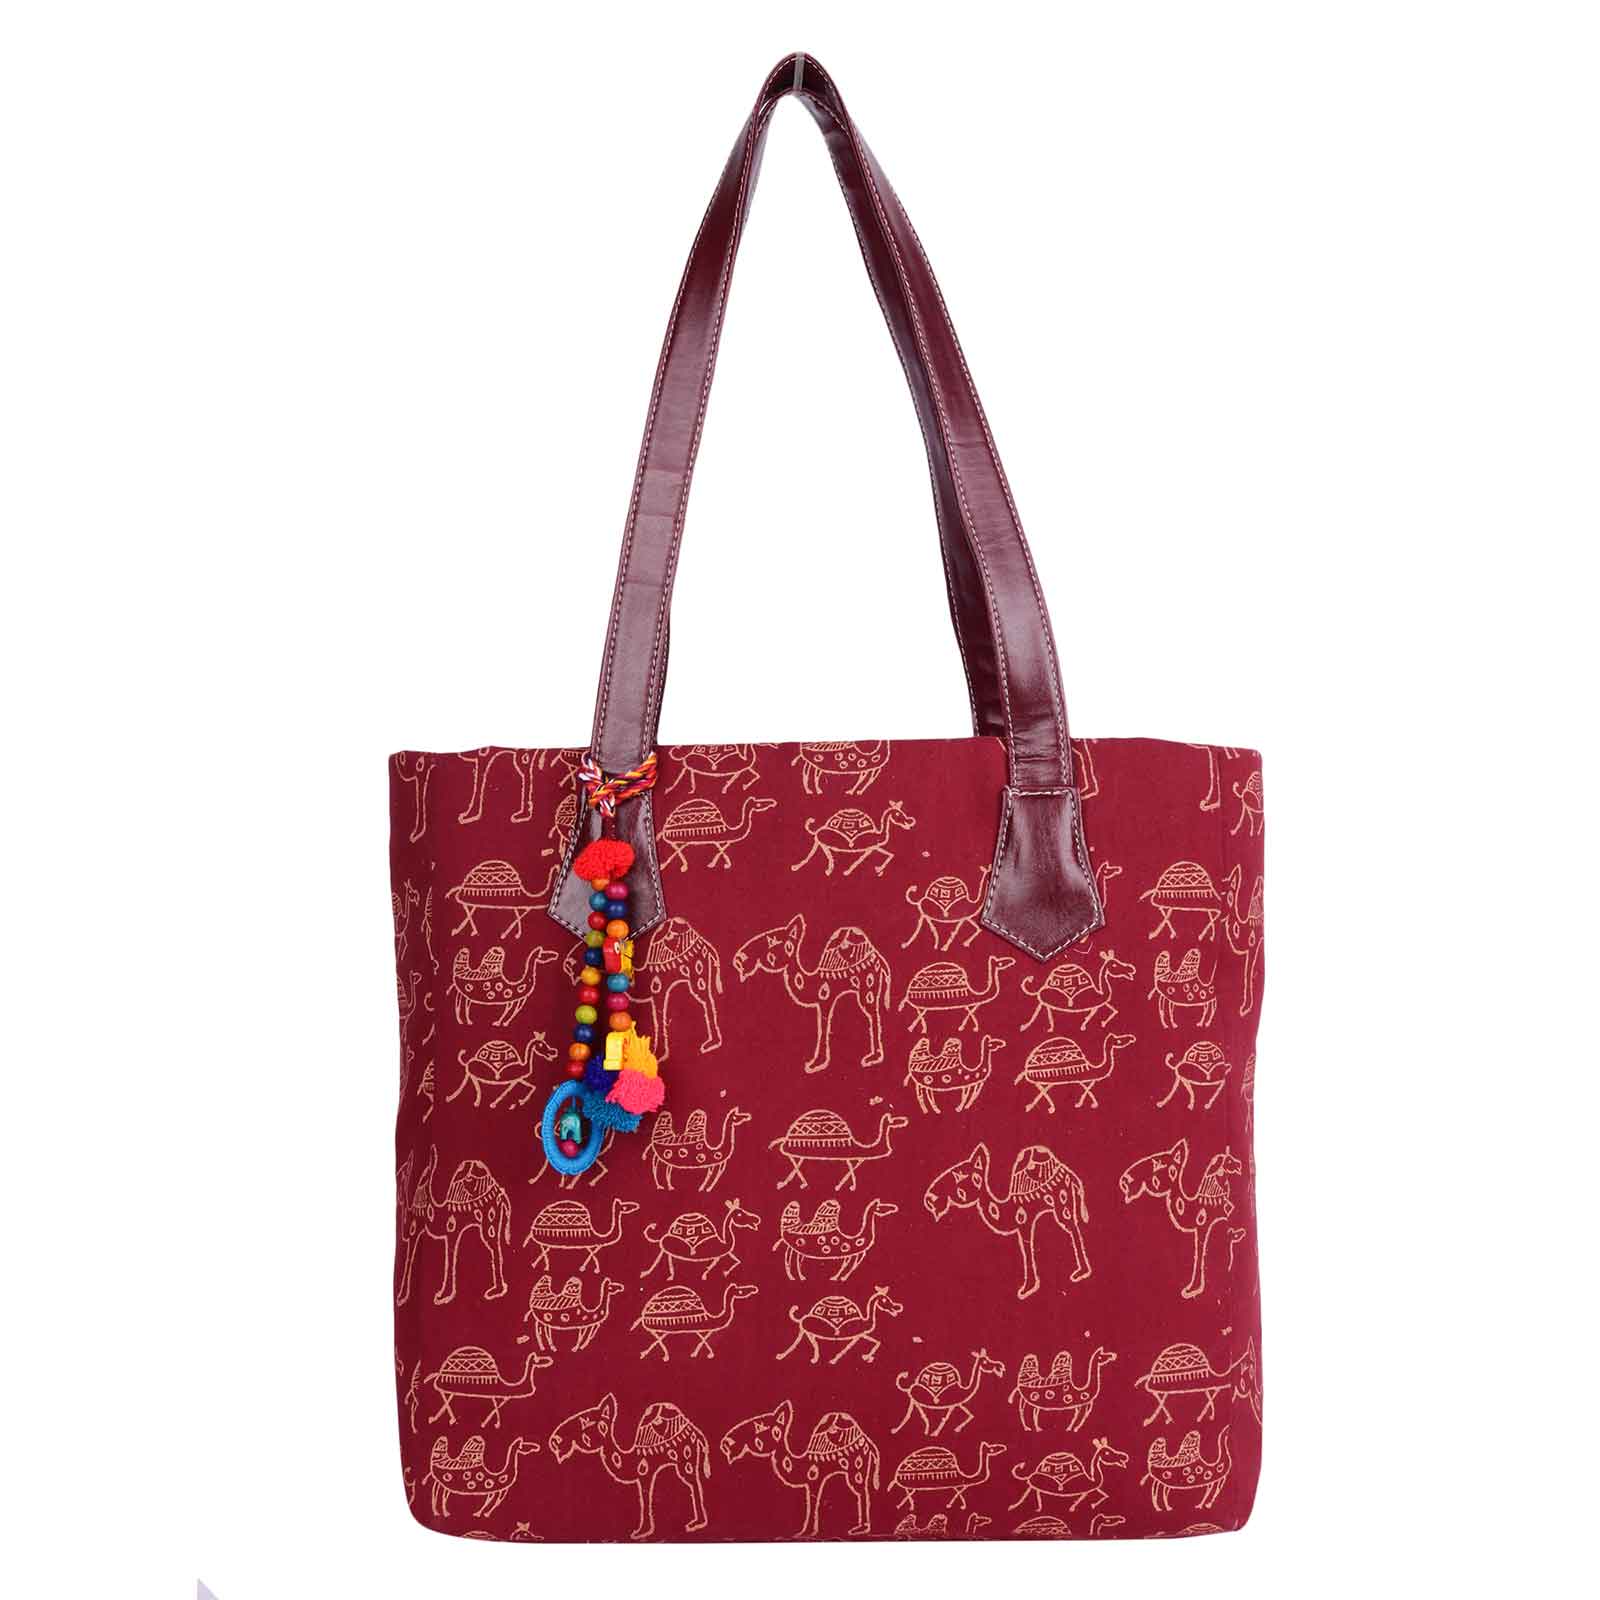 Indha Craft Cotton Hand Block Printed Maroon Colour Stylish Hand Bag for Women's